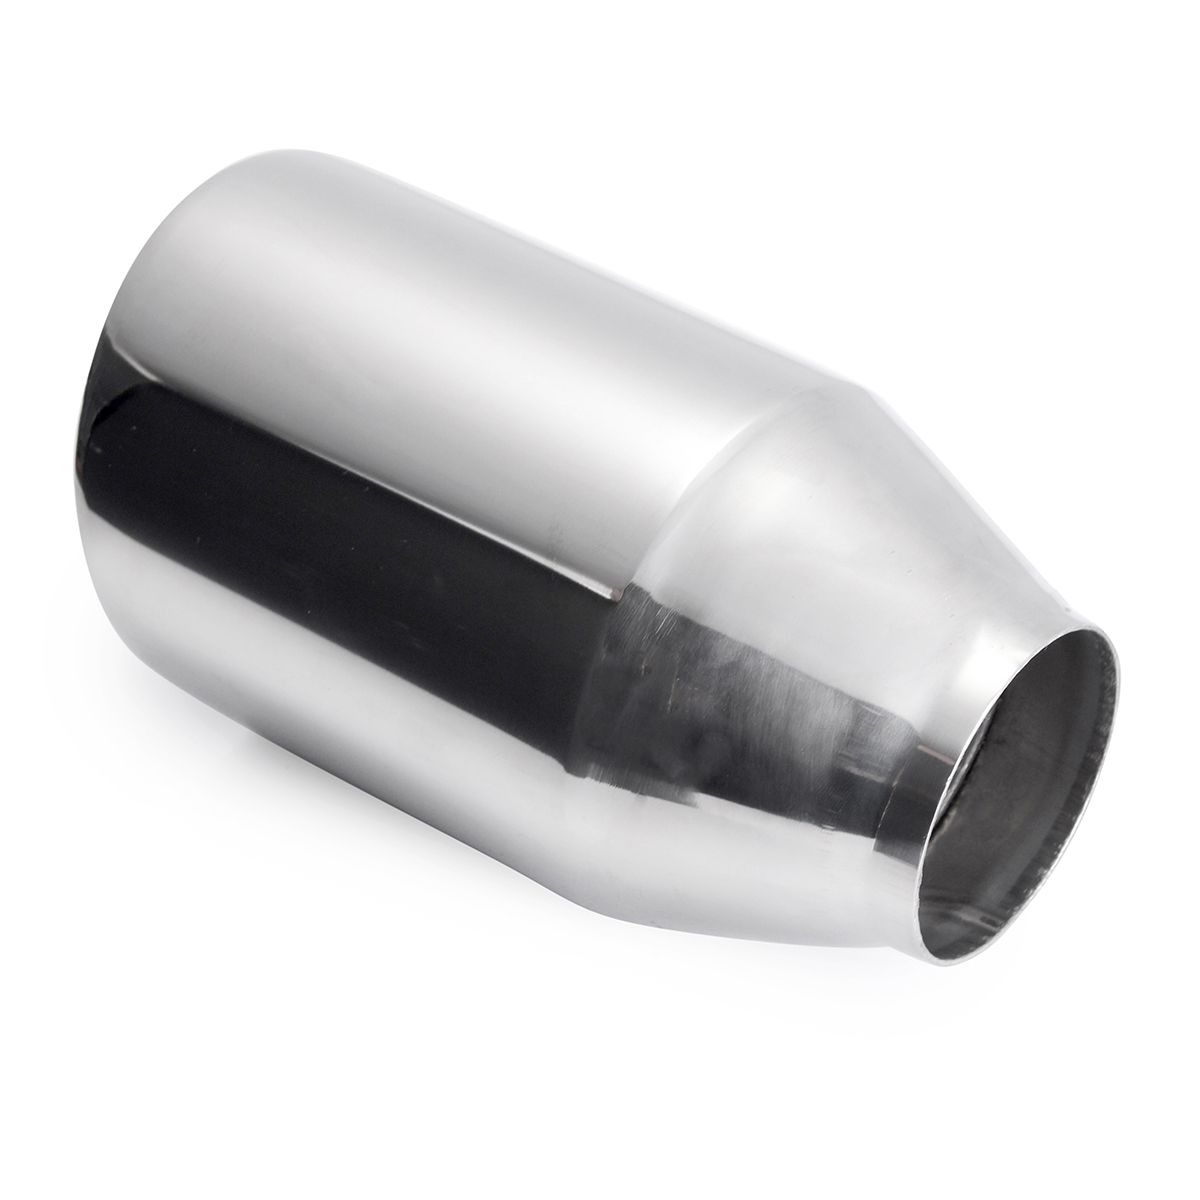 Universal-Stainless-Steel-Exhaust-Muffler-Double-Wall-Round-Slant-25-Inch-Inelt-4-Inch-Outlet-1352073